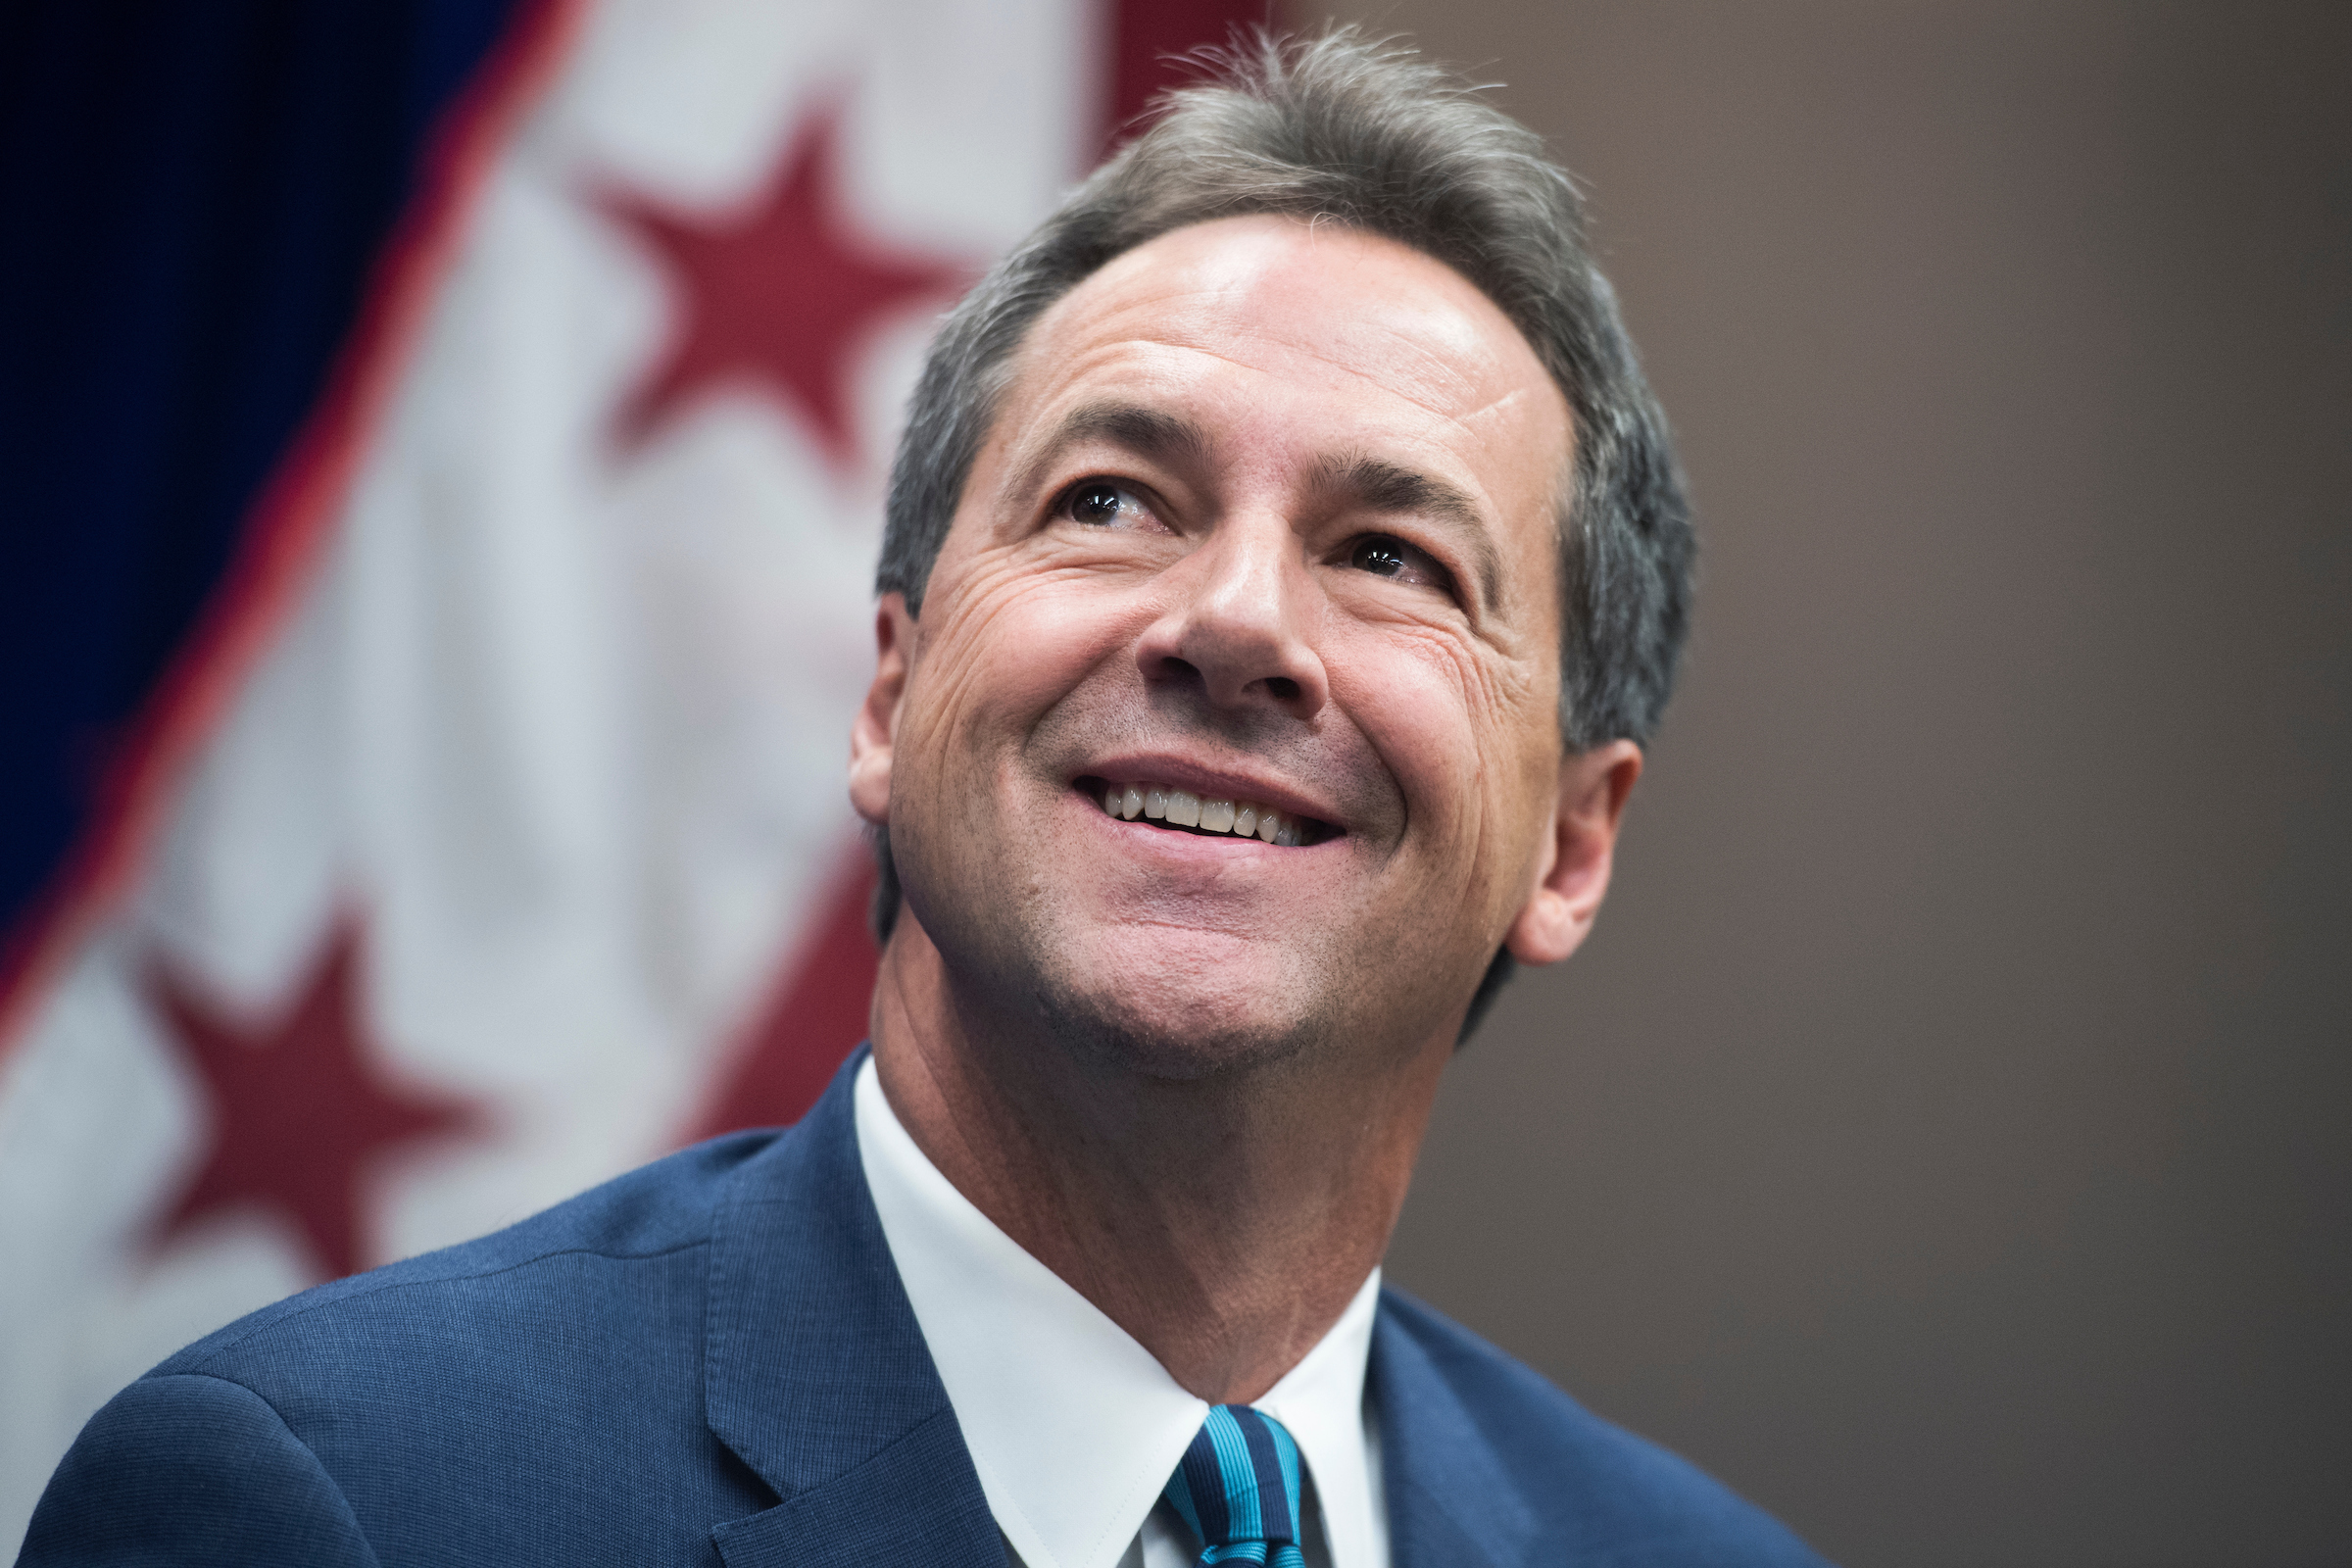 UNITED STATES - SEPTEMBER 19: Montana Gov. Steve Bullock attends a town hall at the American Federation of Teachers in Washington, D.C., on Thursday, September 19, 2019. (Photo By Tom Williams/CQ Roll Call)